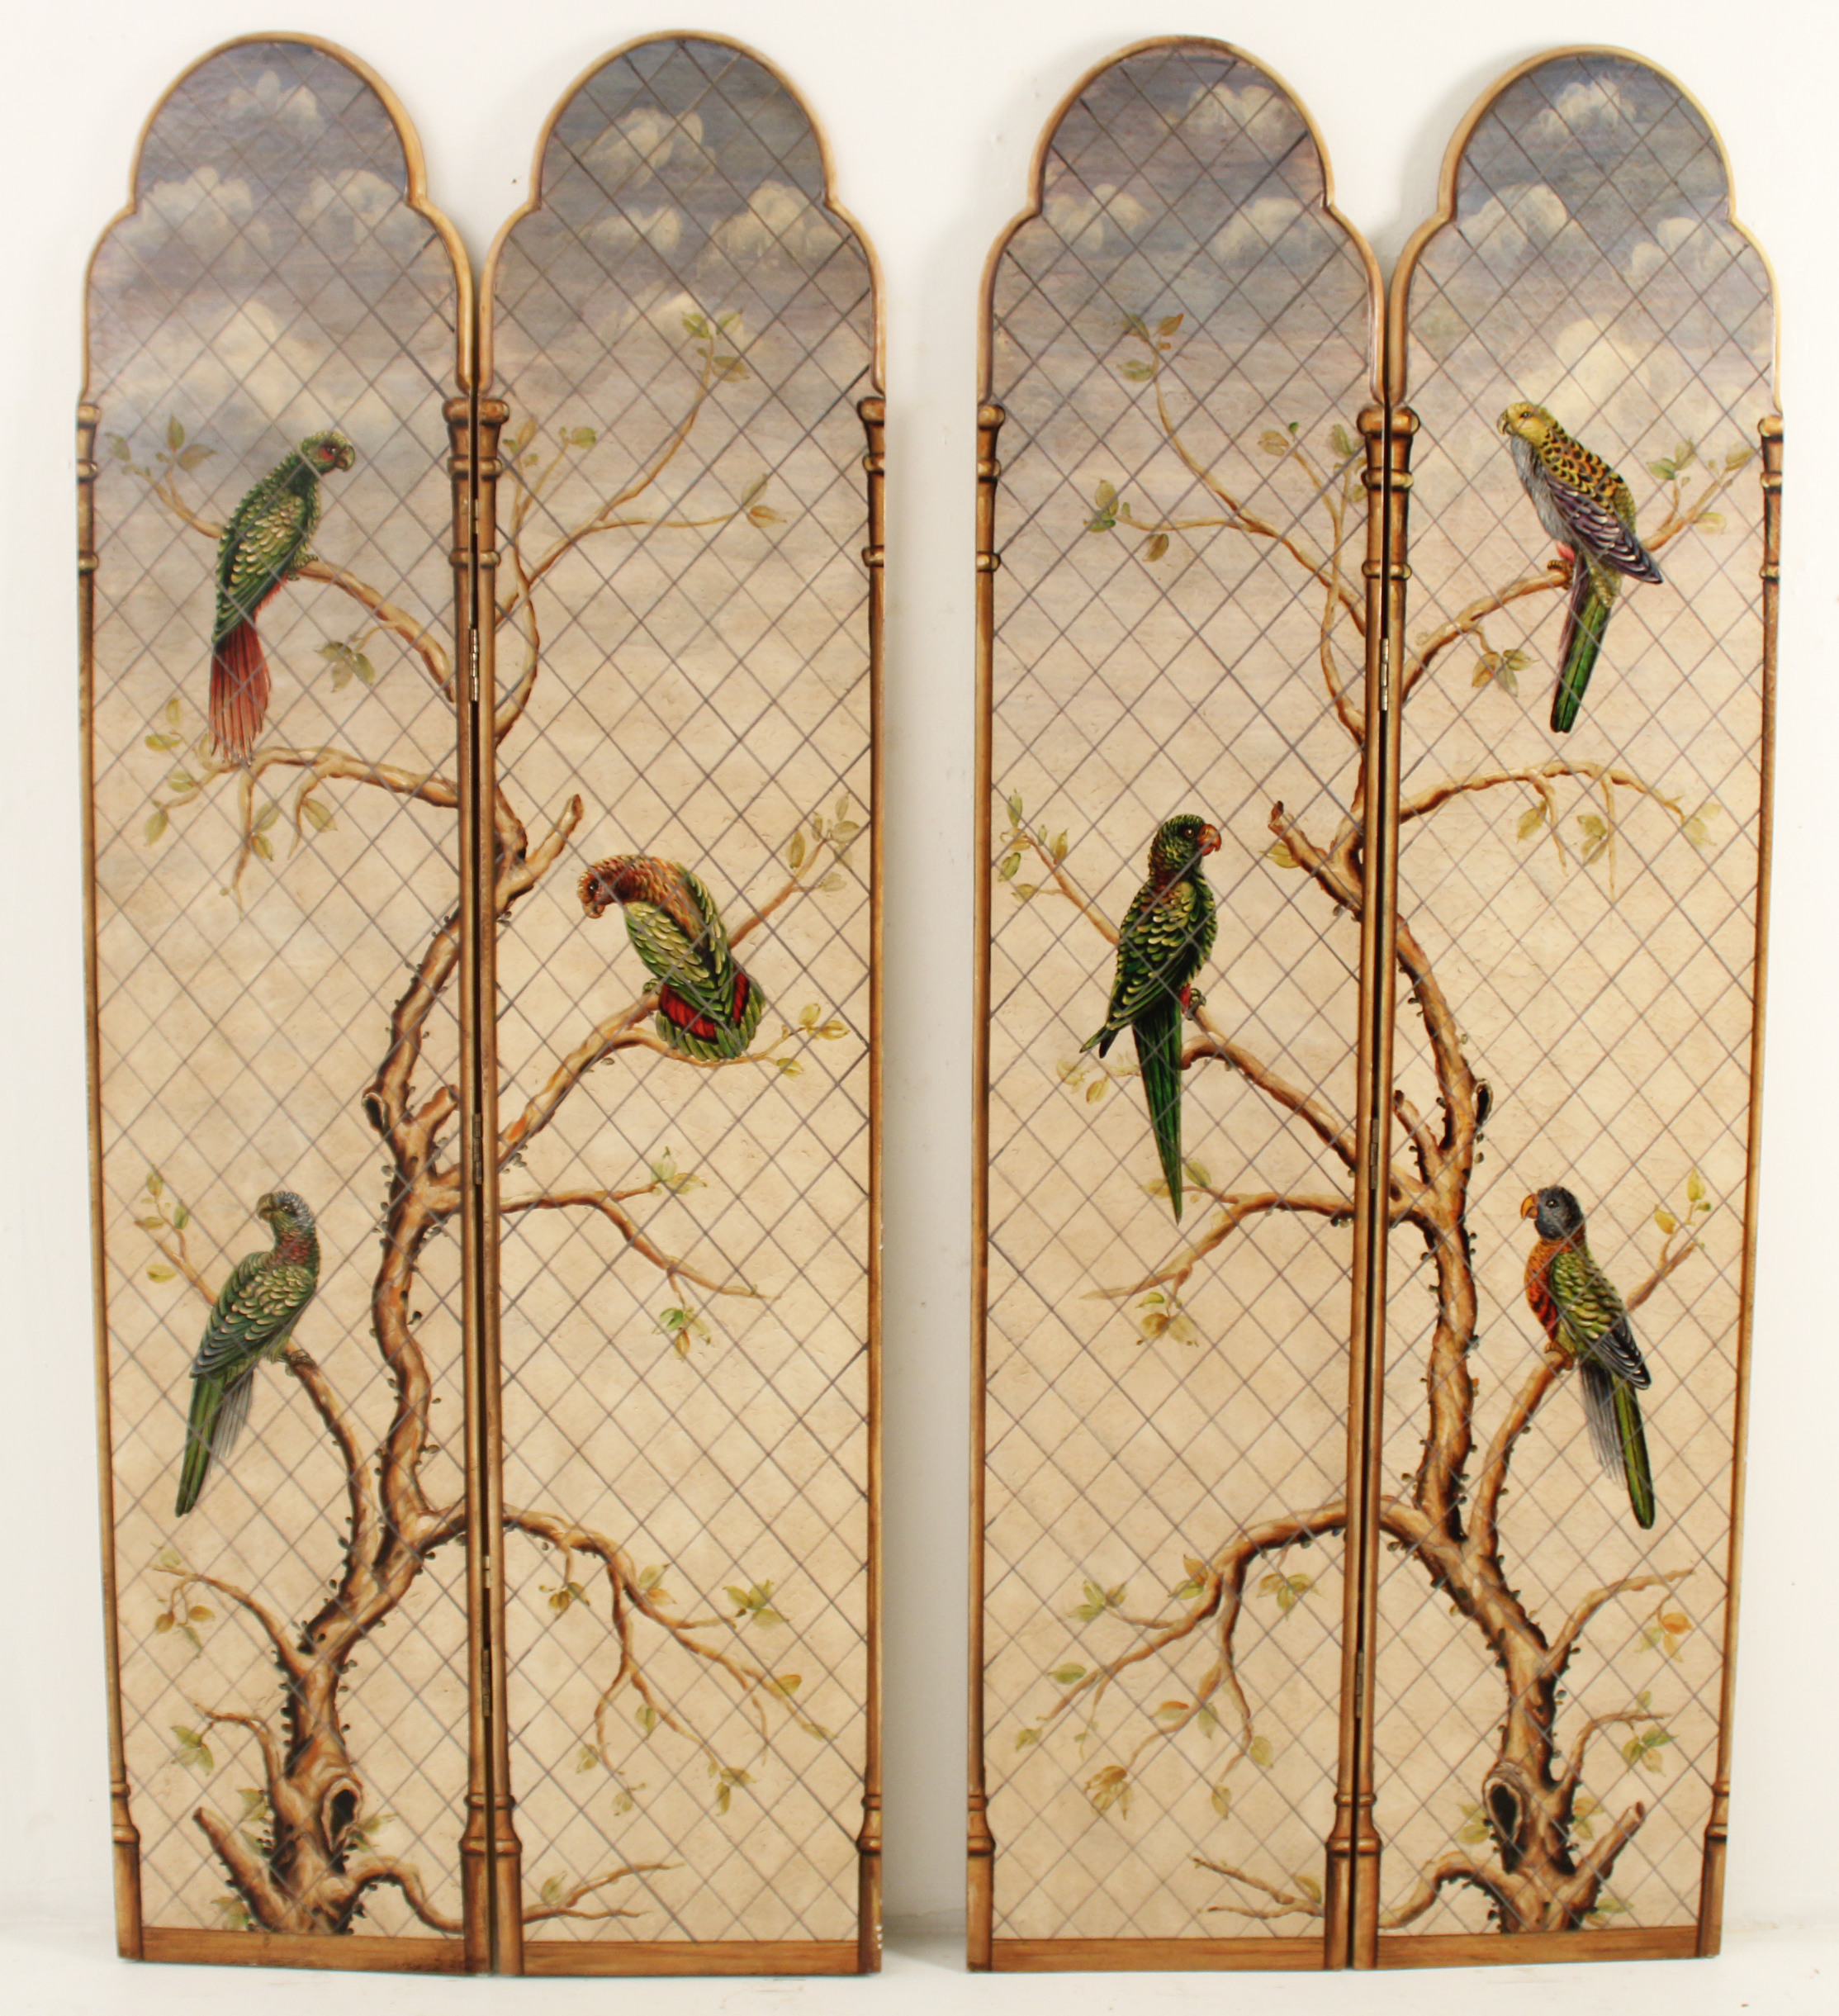 4 PANEL HAND PAINTED SCREEN Silver 2c8b9a